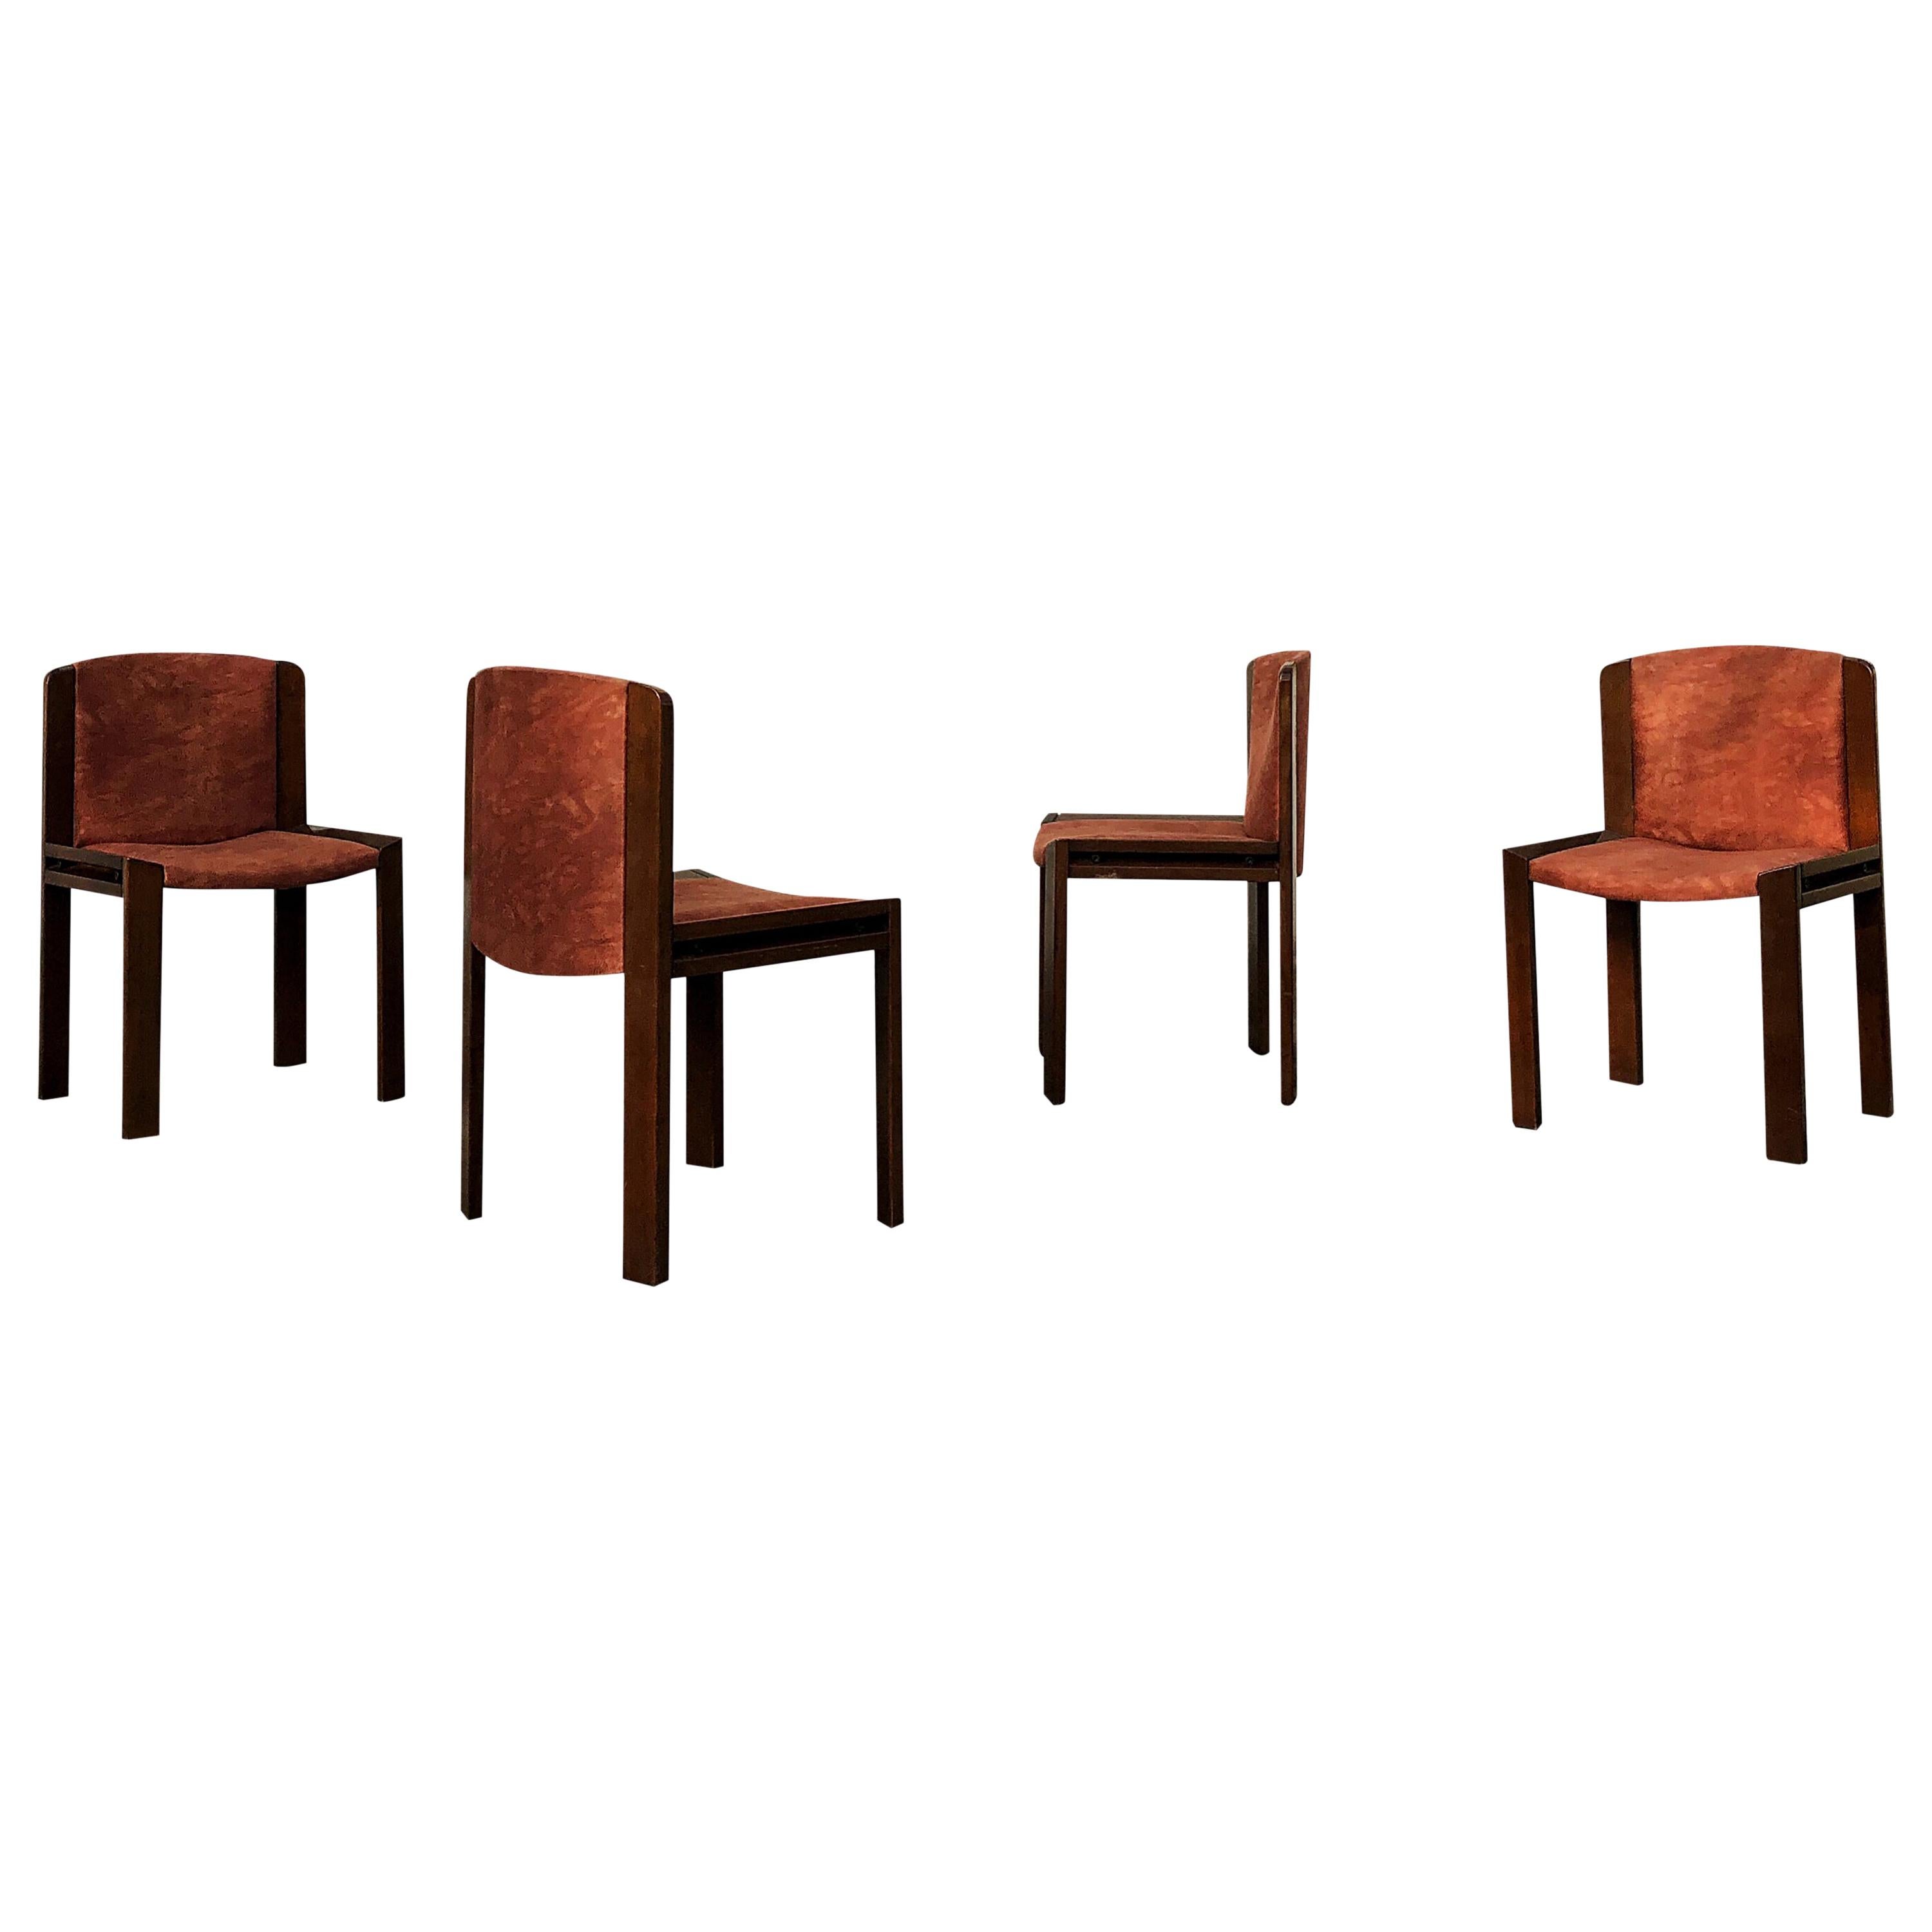 Joe Colombo Midcentury Walnut "300" Dining Chairs for Pozzi, 1966, Set of 4 For Sale